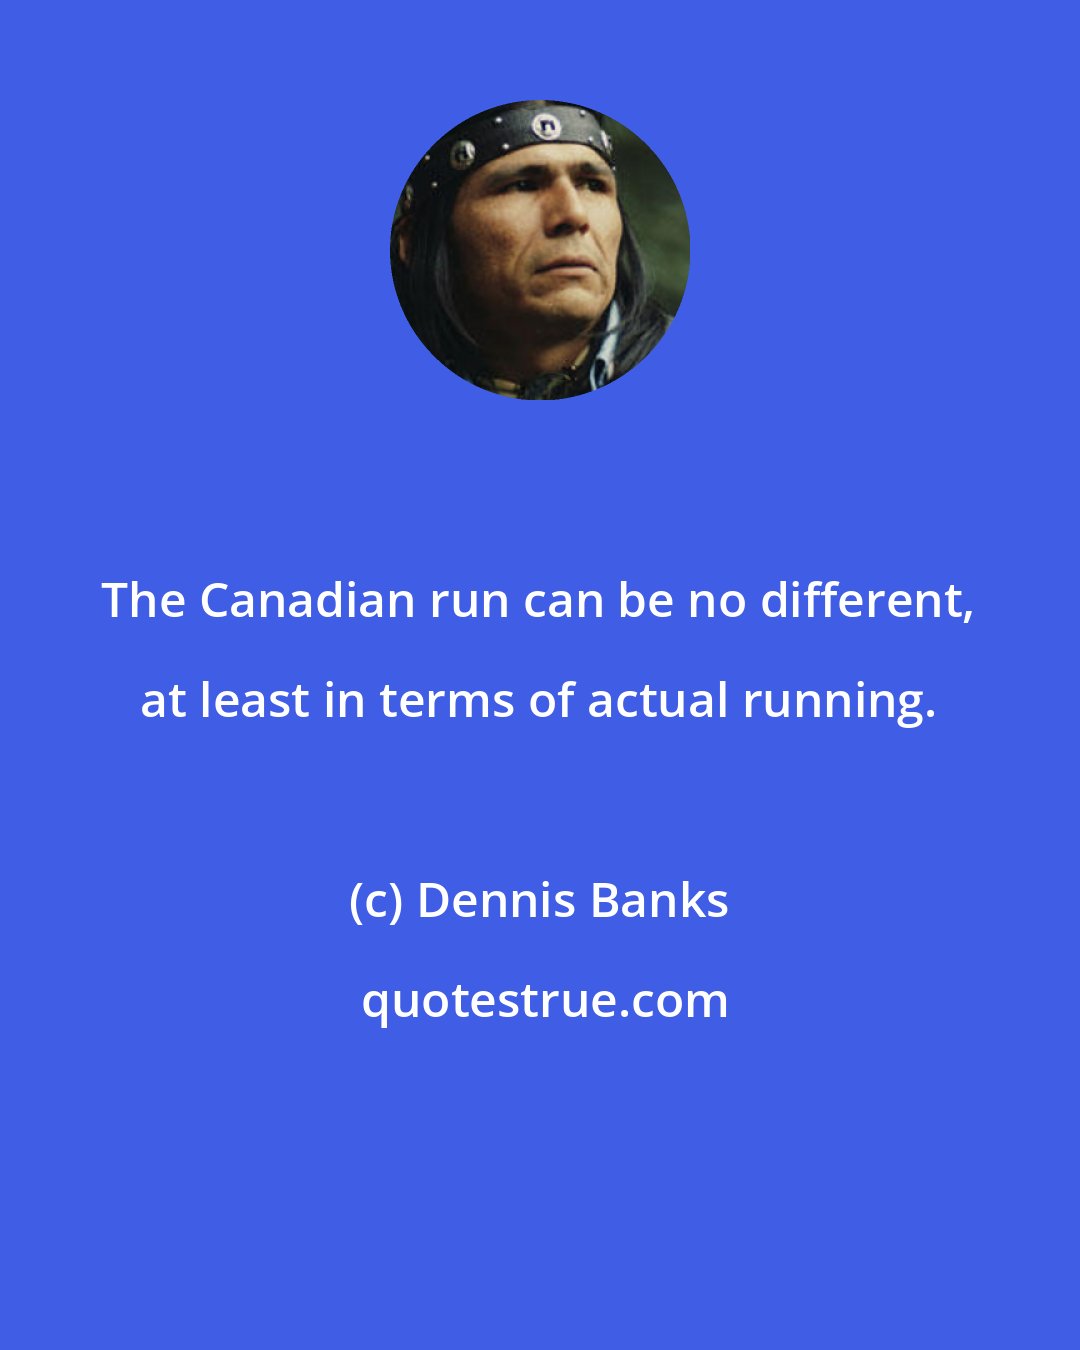 Dennis Banks: The Canadian run can be no different, at least in terms of actual running.